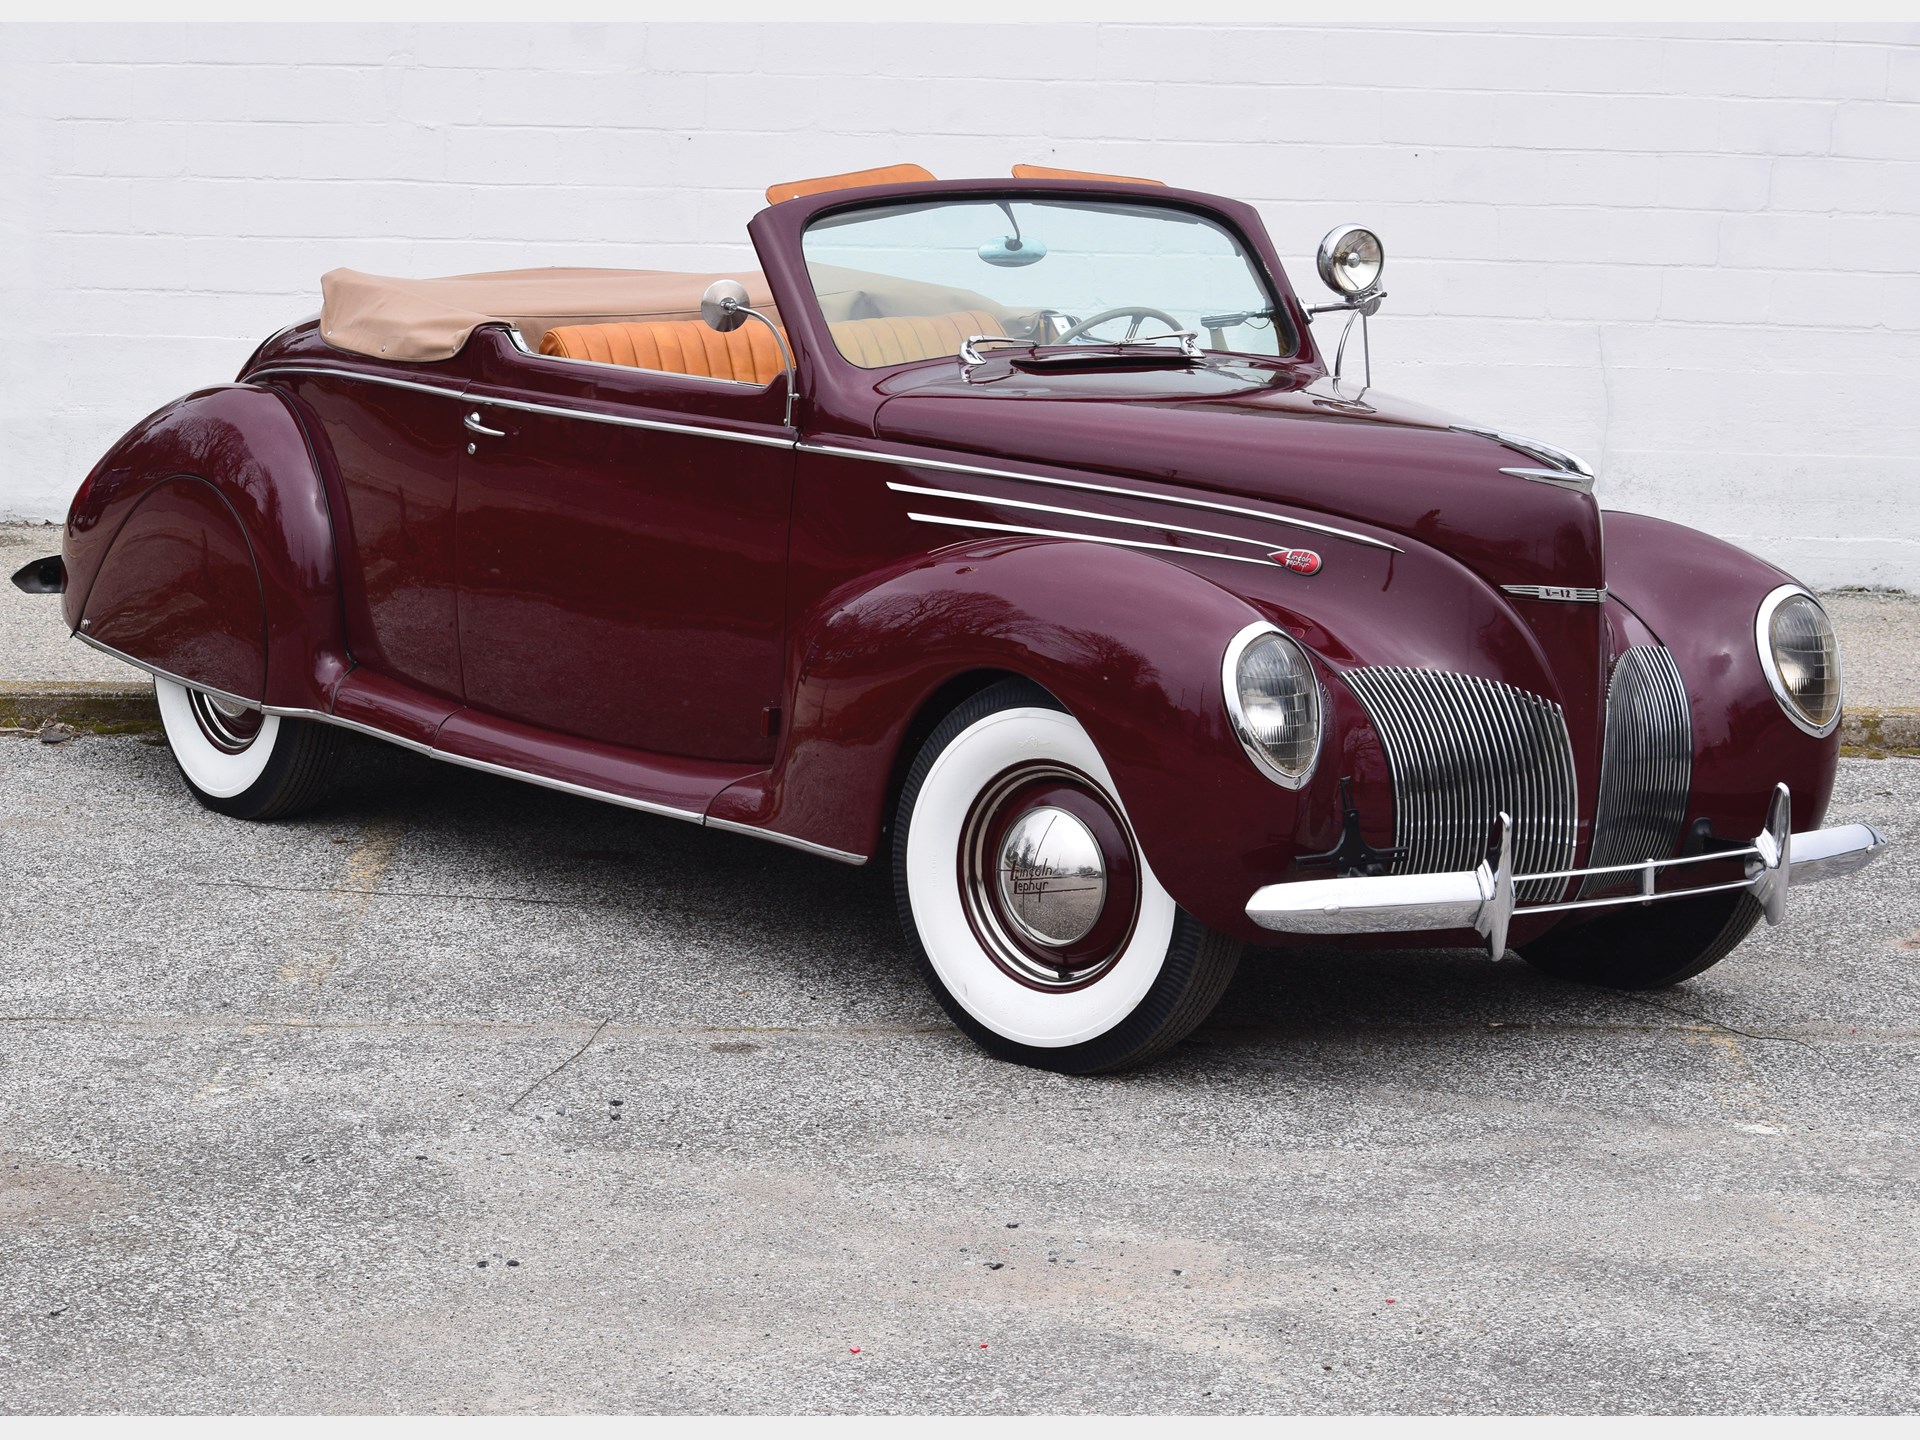 Factory Photo Ref. #52802 1939 Lincoln Zephyr Convertible Coupe @ Hotel 